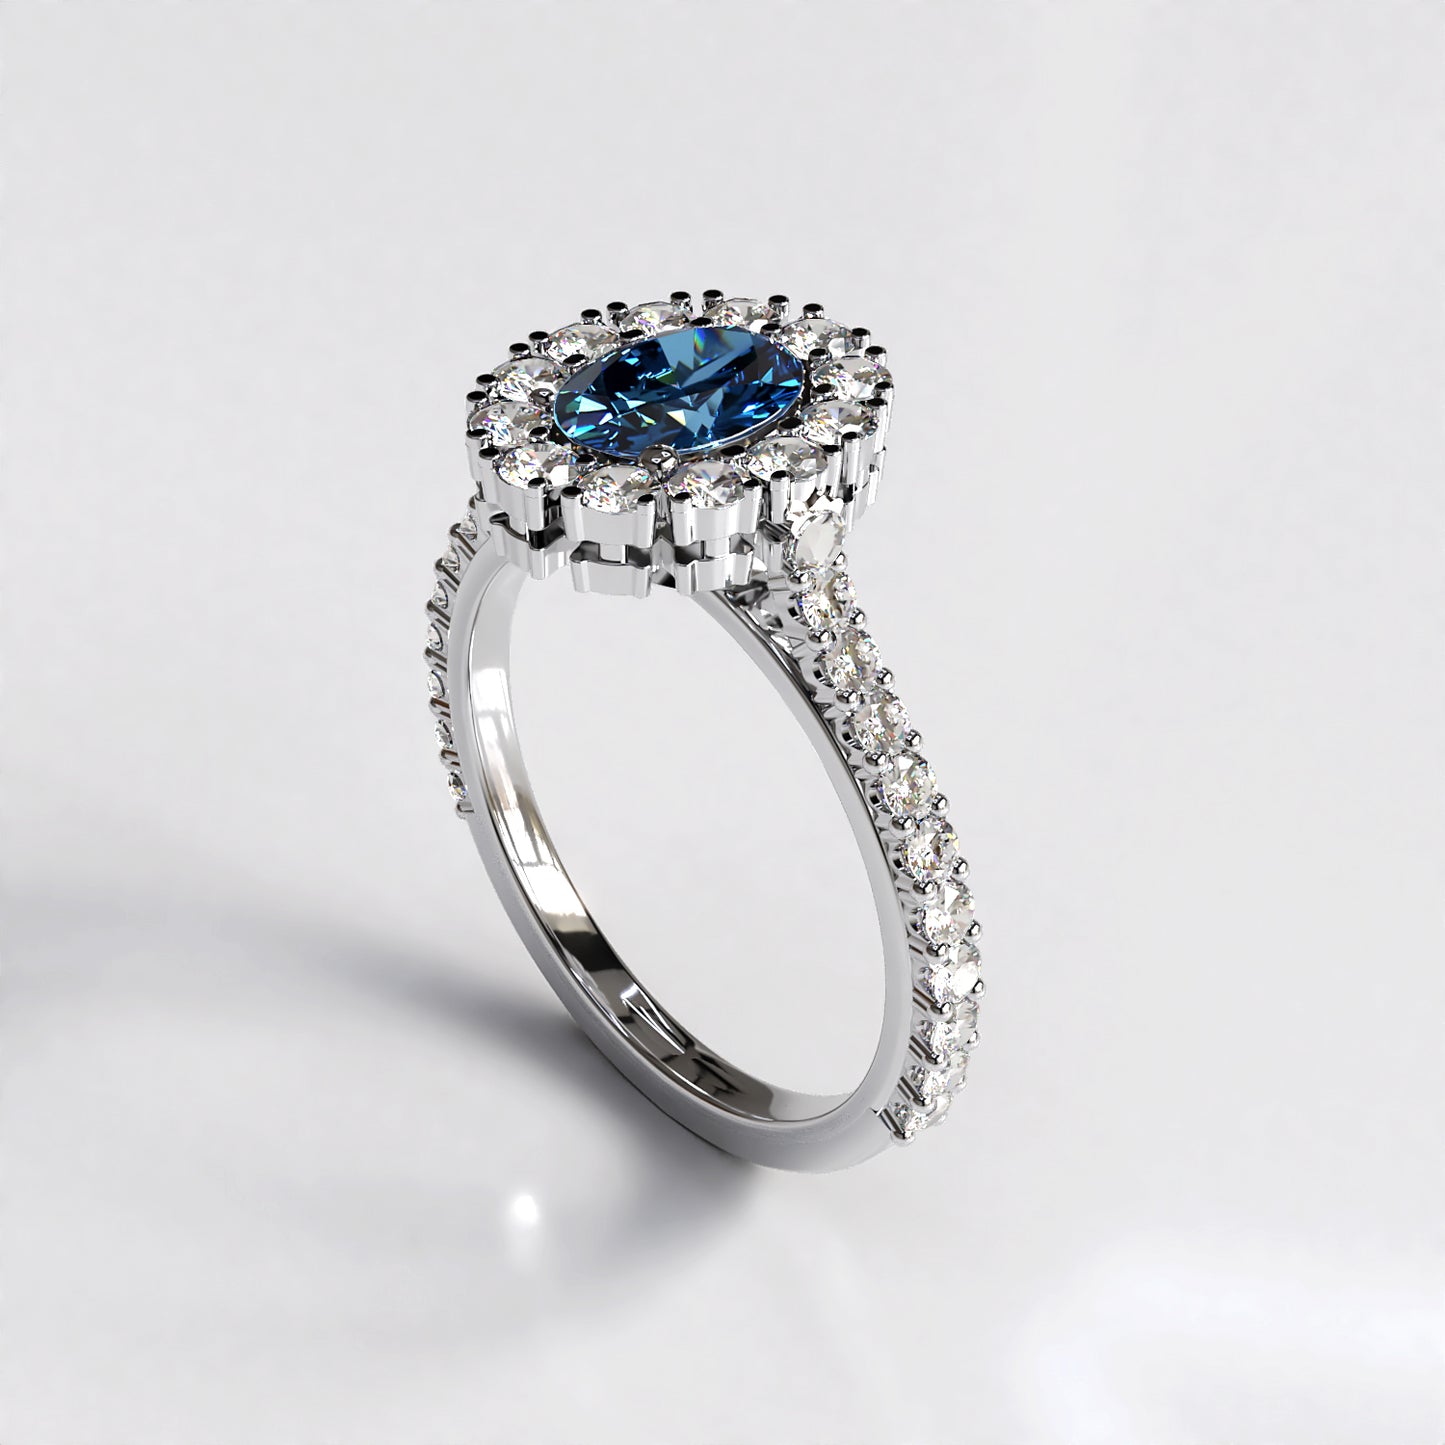 Vintage Halo: Platinum Engagement Ring with 1ct Sapphire Centre Stone and Diamond Halo